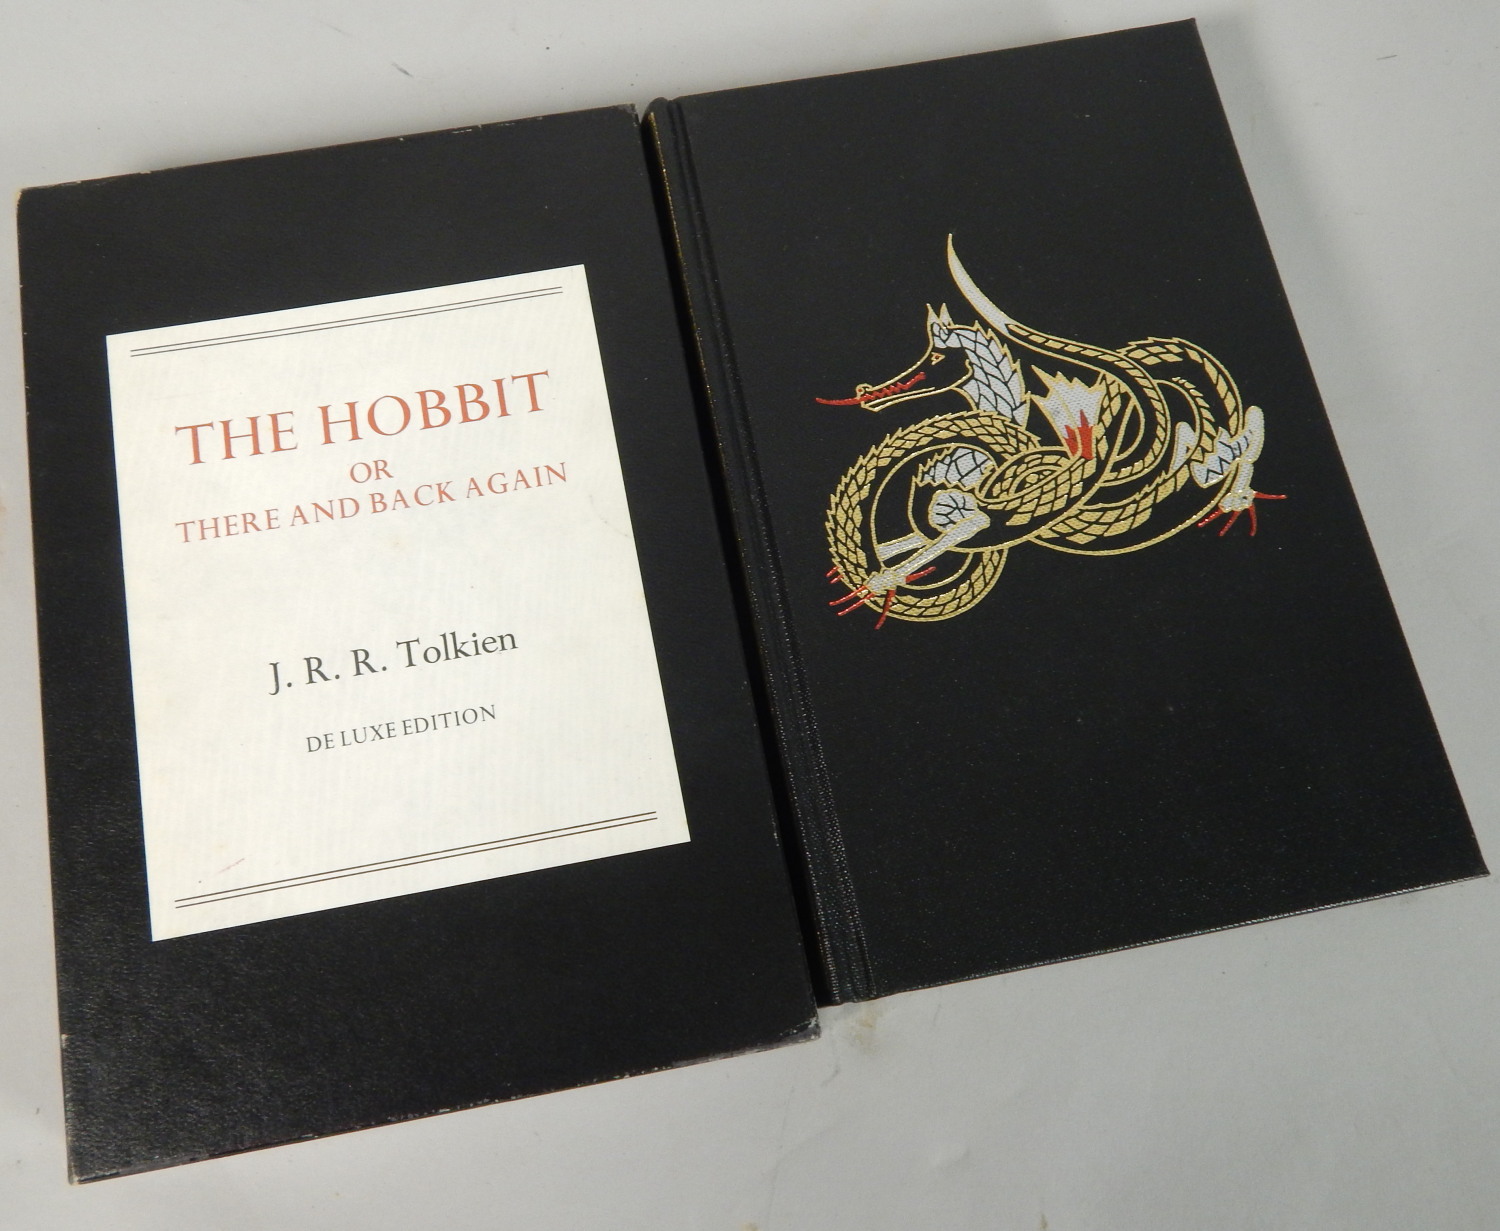 A deluxe edition of JRR Tolkien's The Hobbit, by George Allen and Unwin, in presentation box.